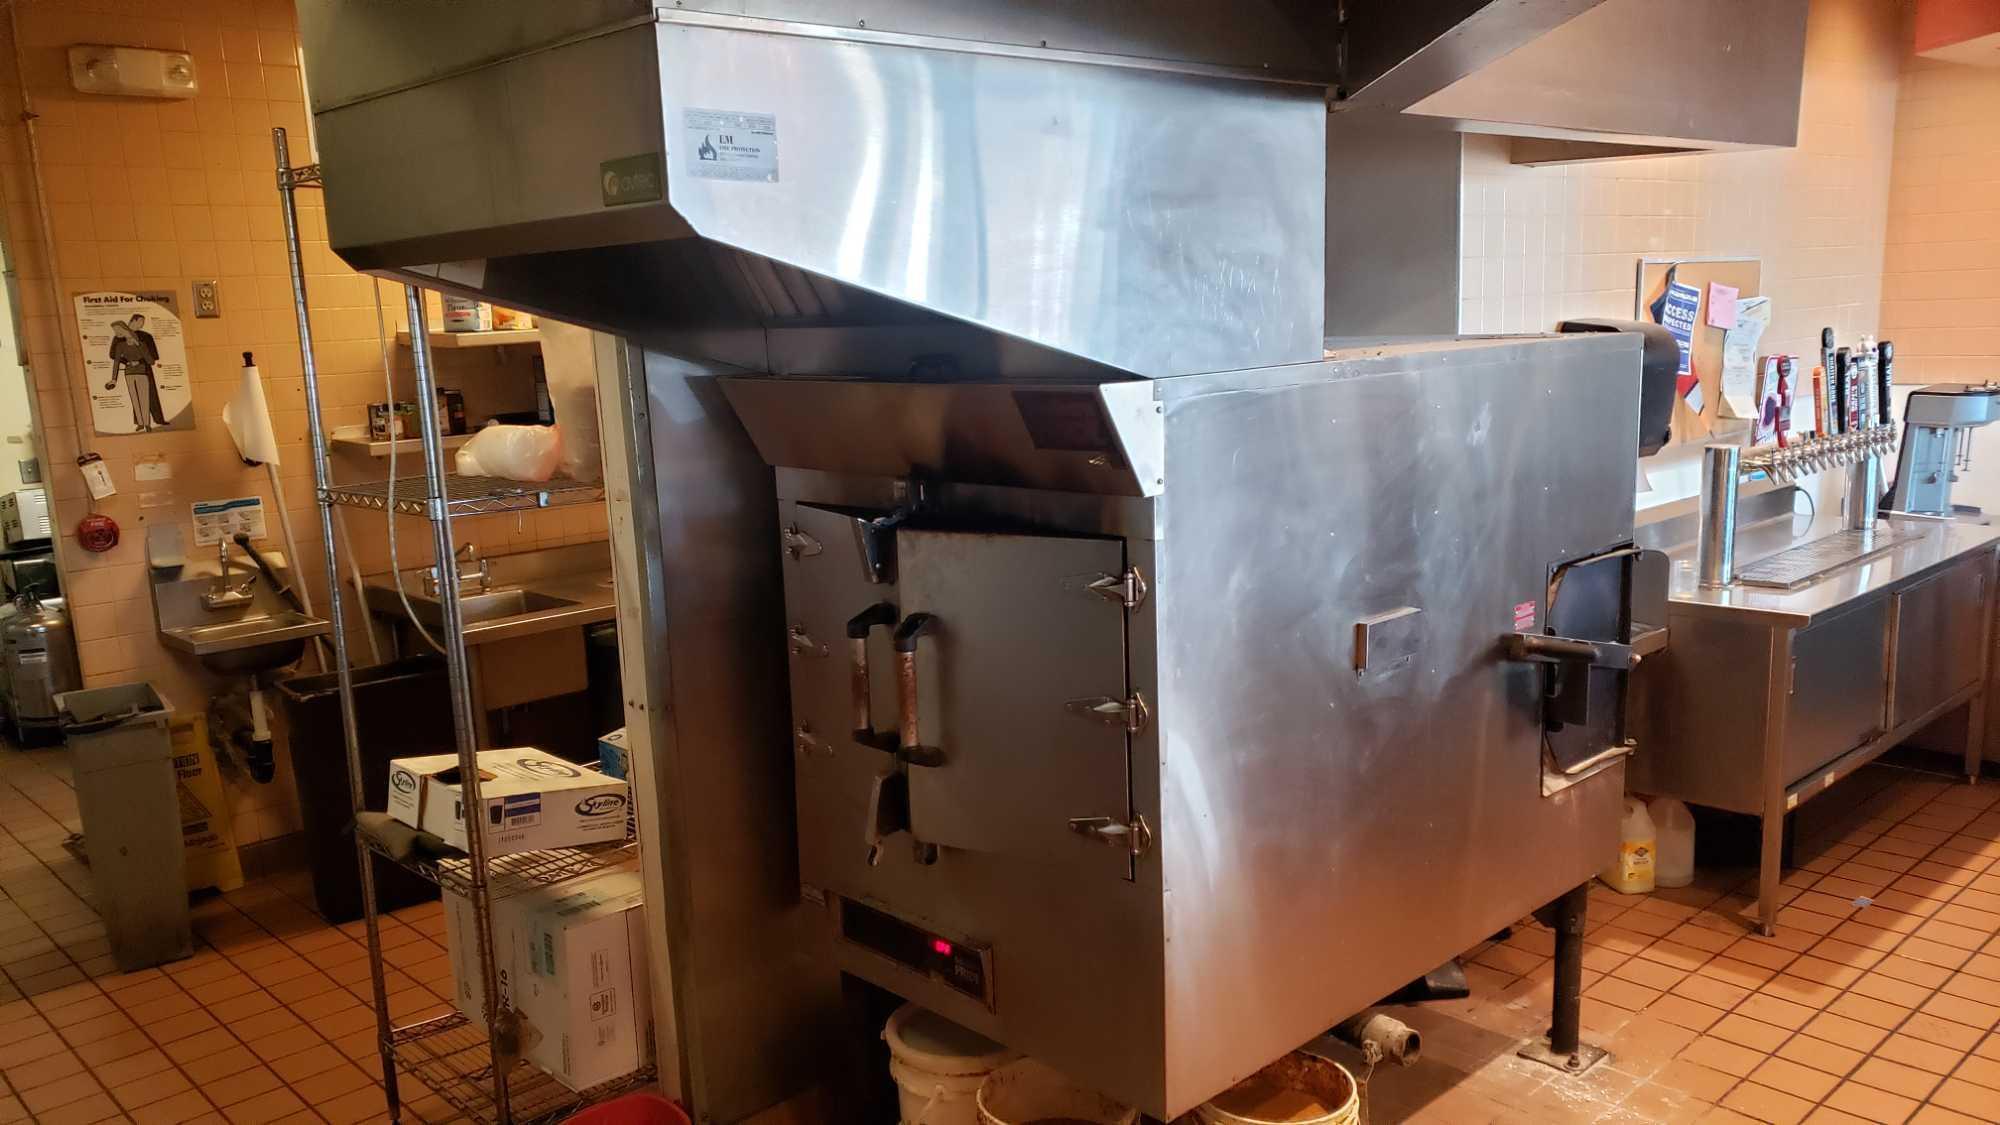 LARGE SOUTHERN PRIDE SMOKER WITH AVTEC HOOD